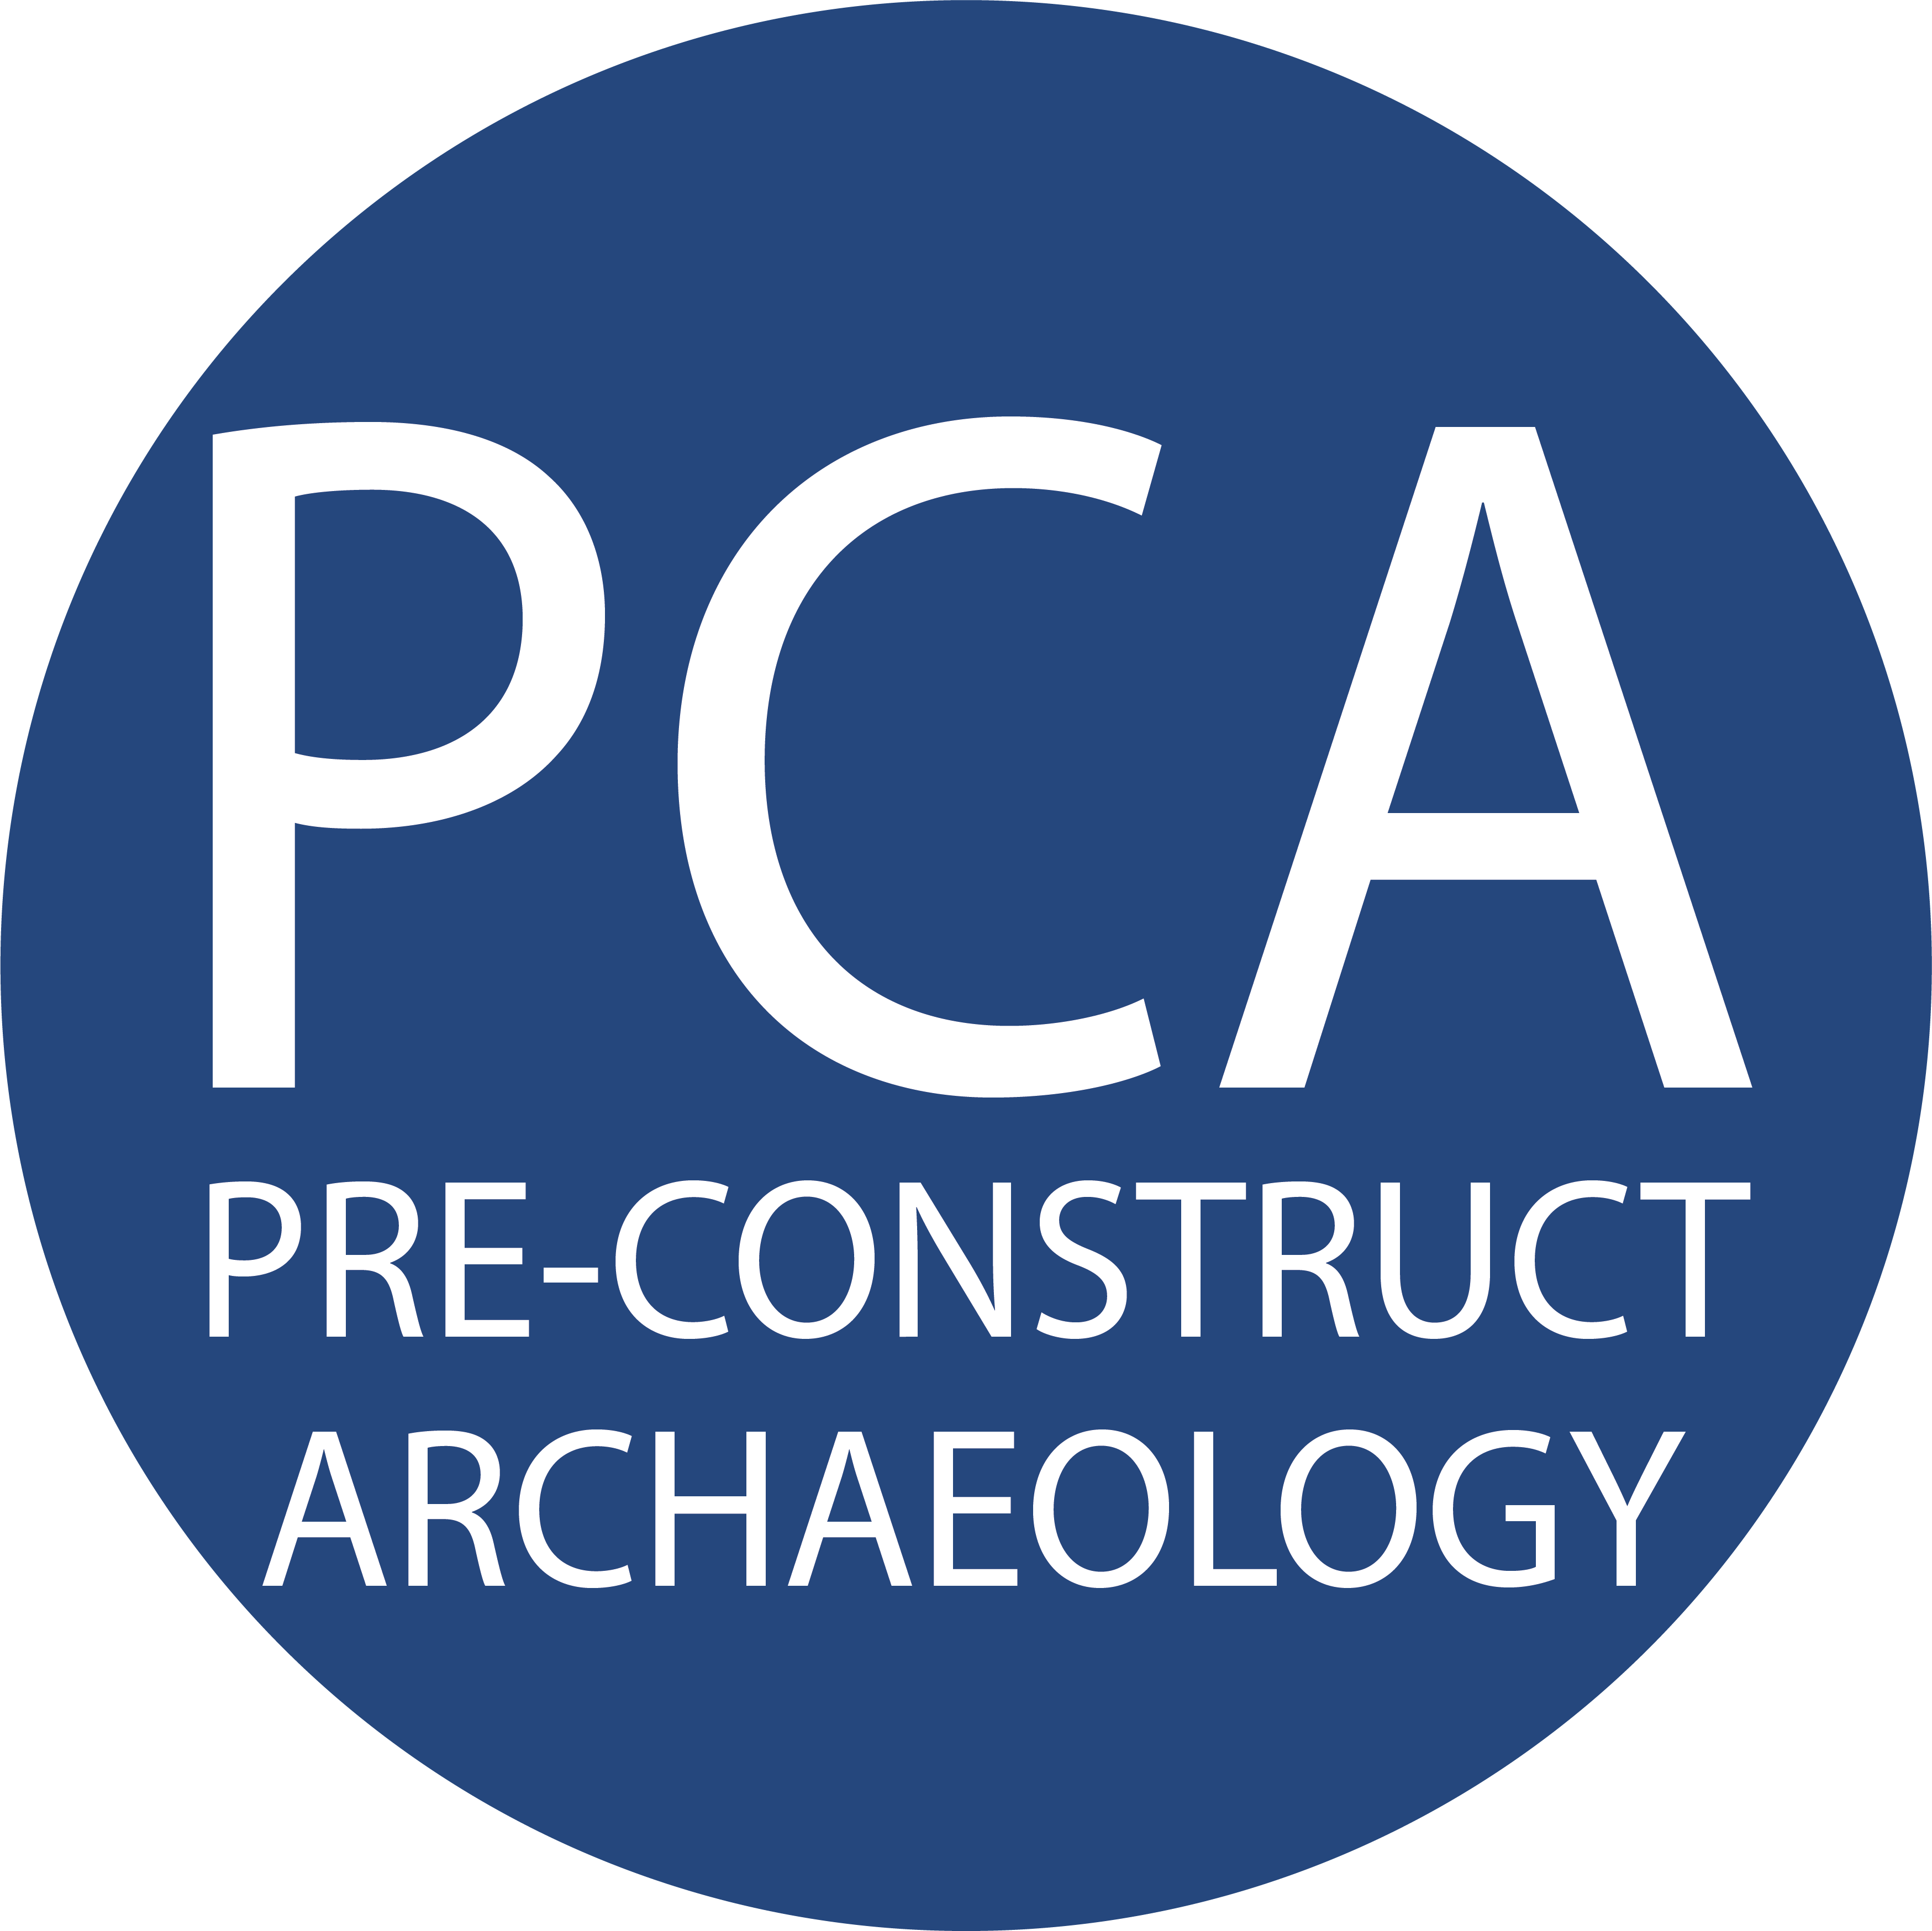 _images/PCA_logo_round.png